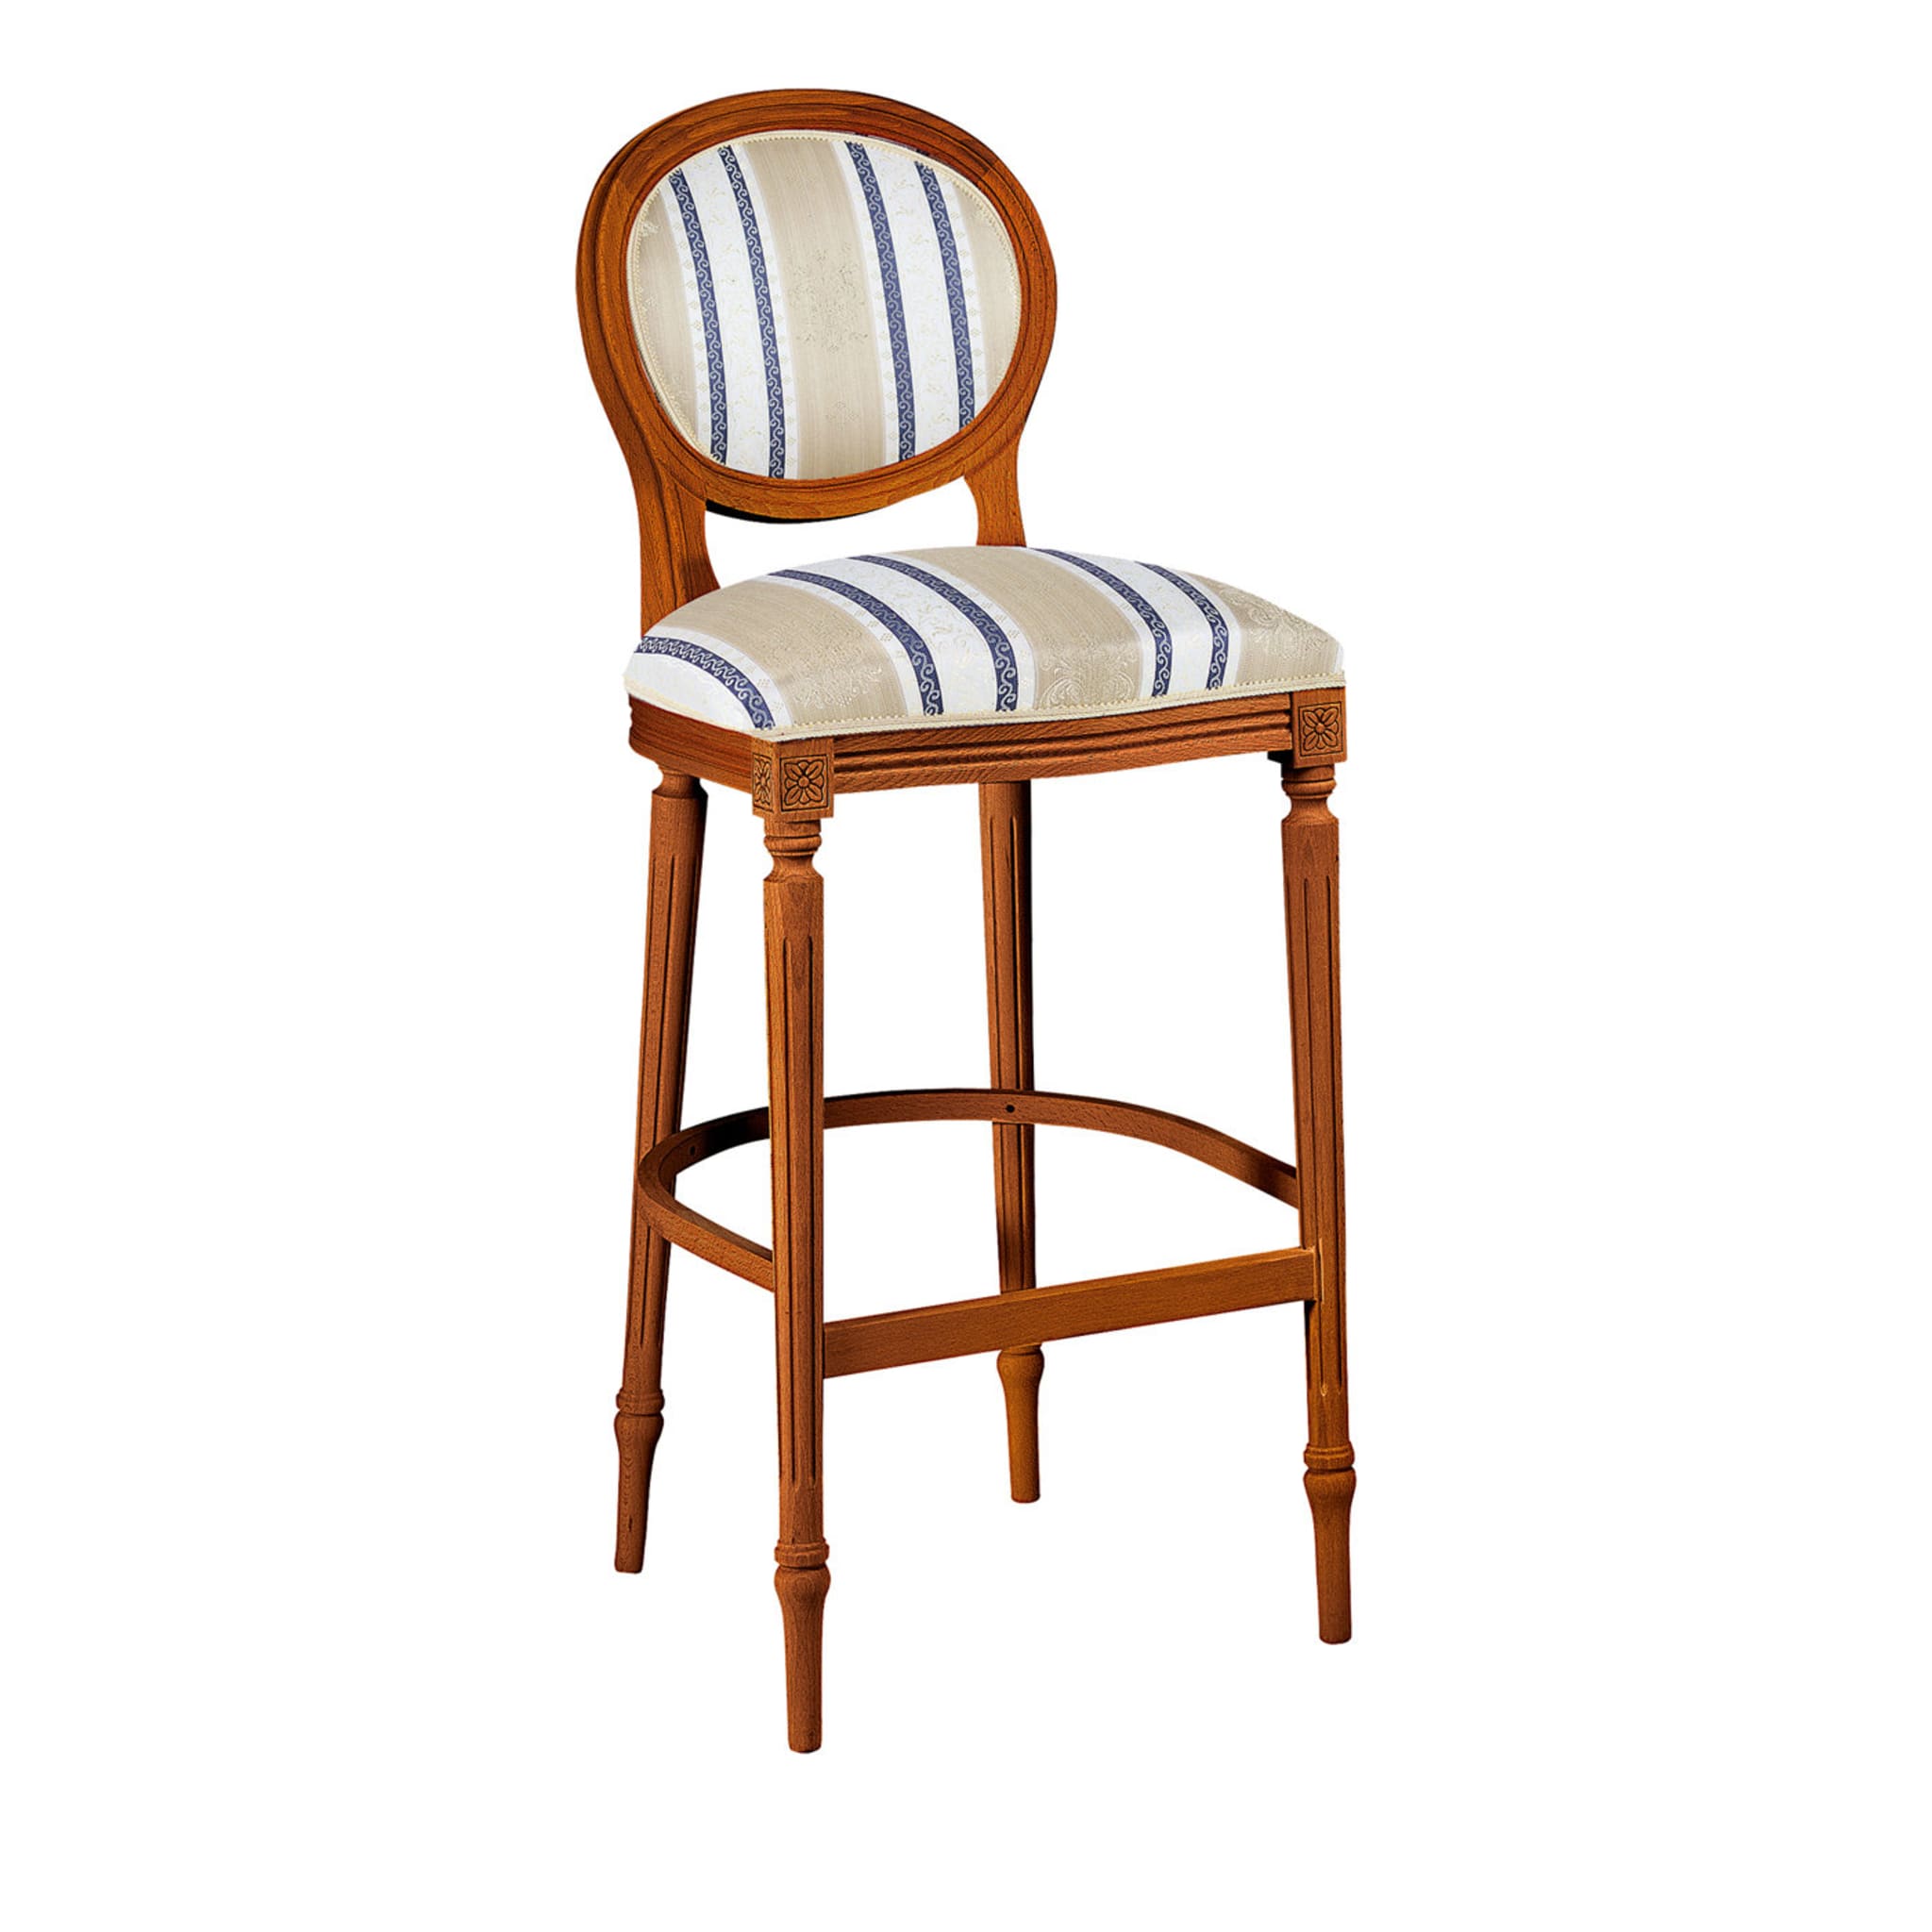 Multicolor Striped Bar Stool - Main view